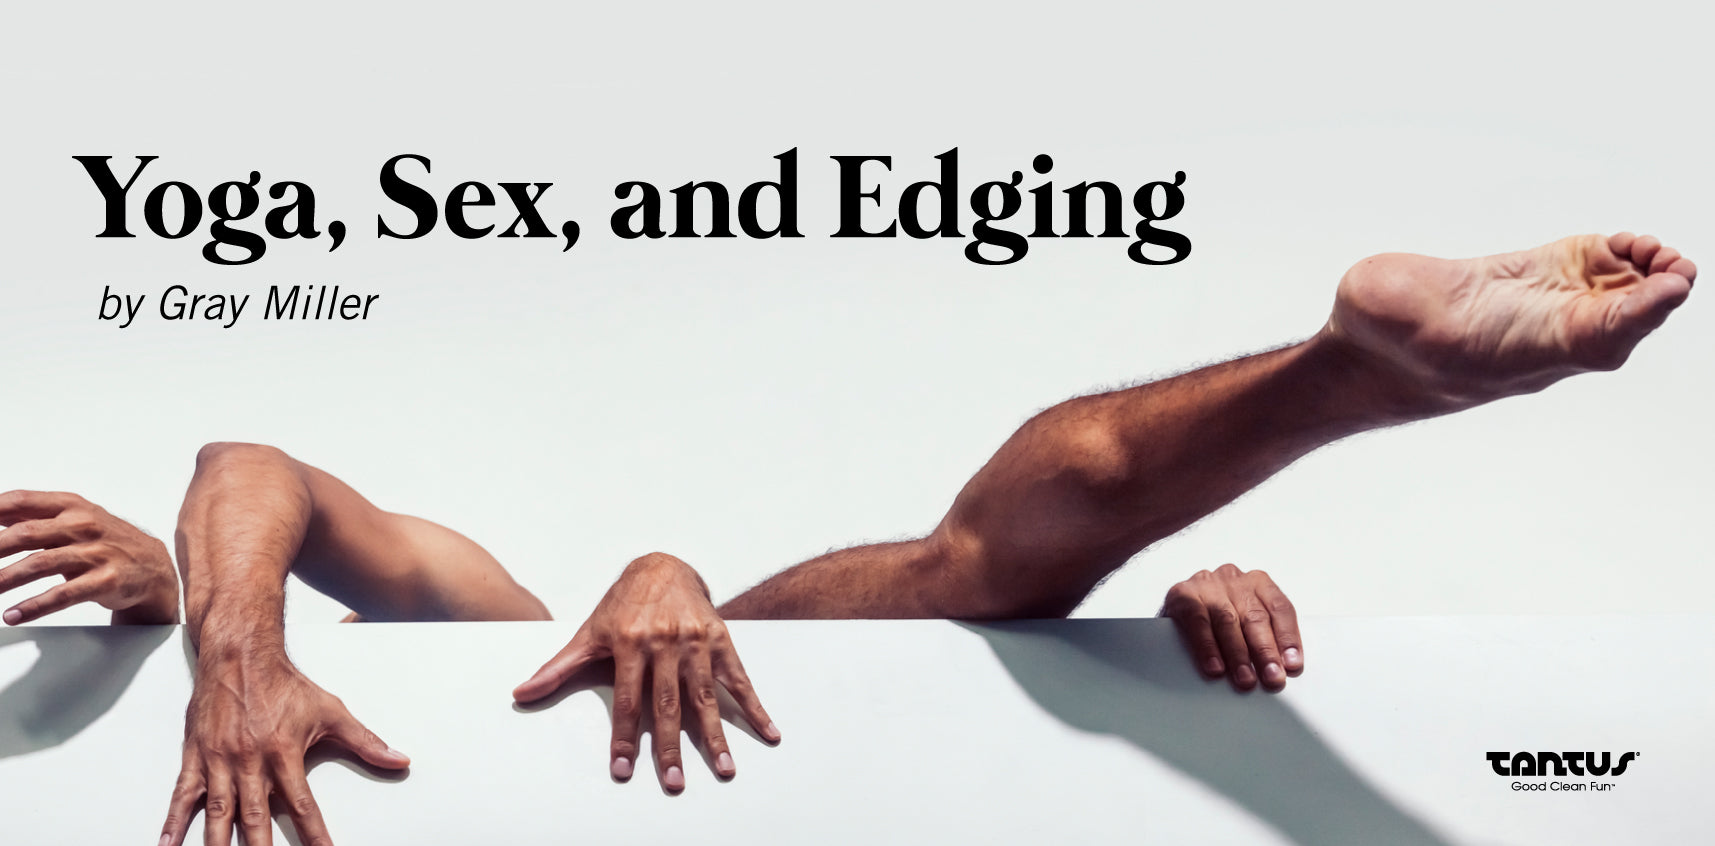 Yoga, Sex and Edging image